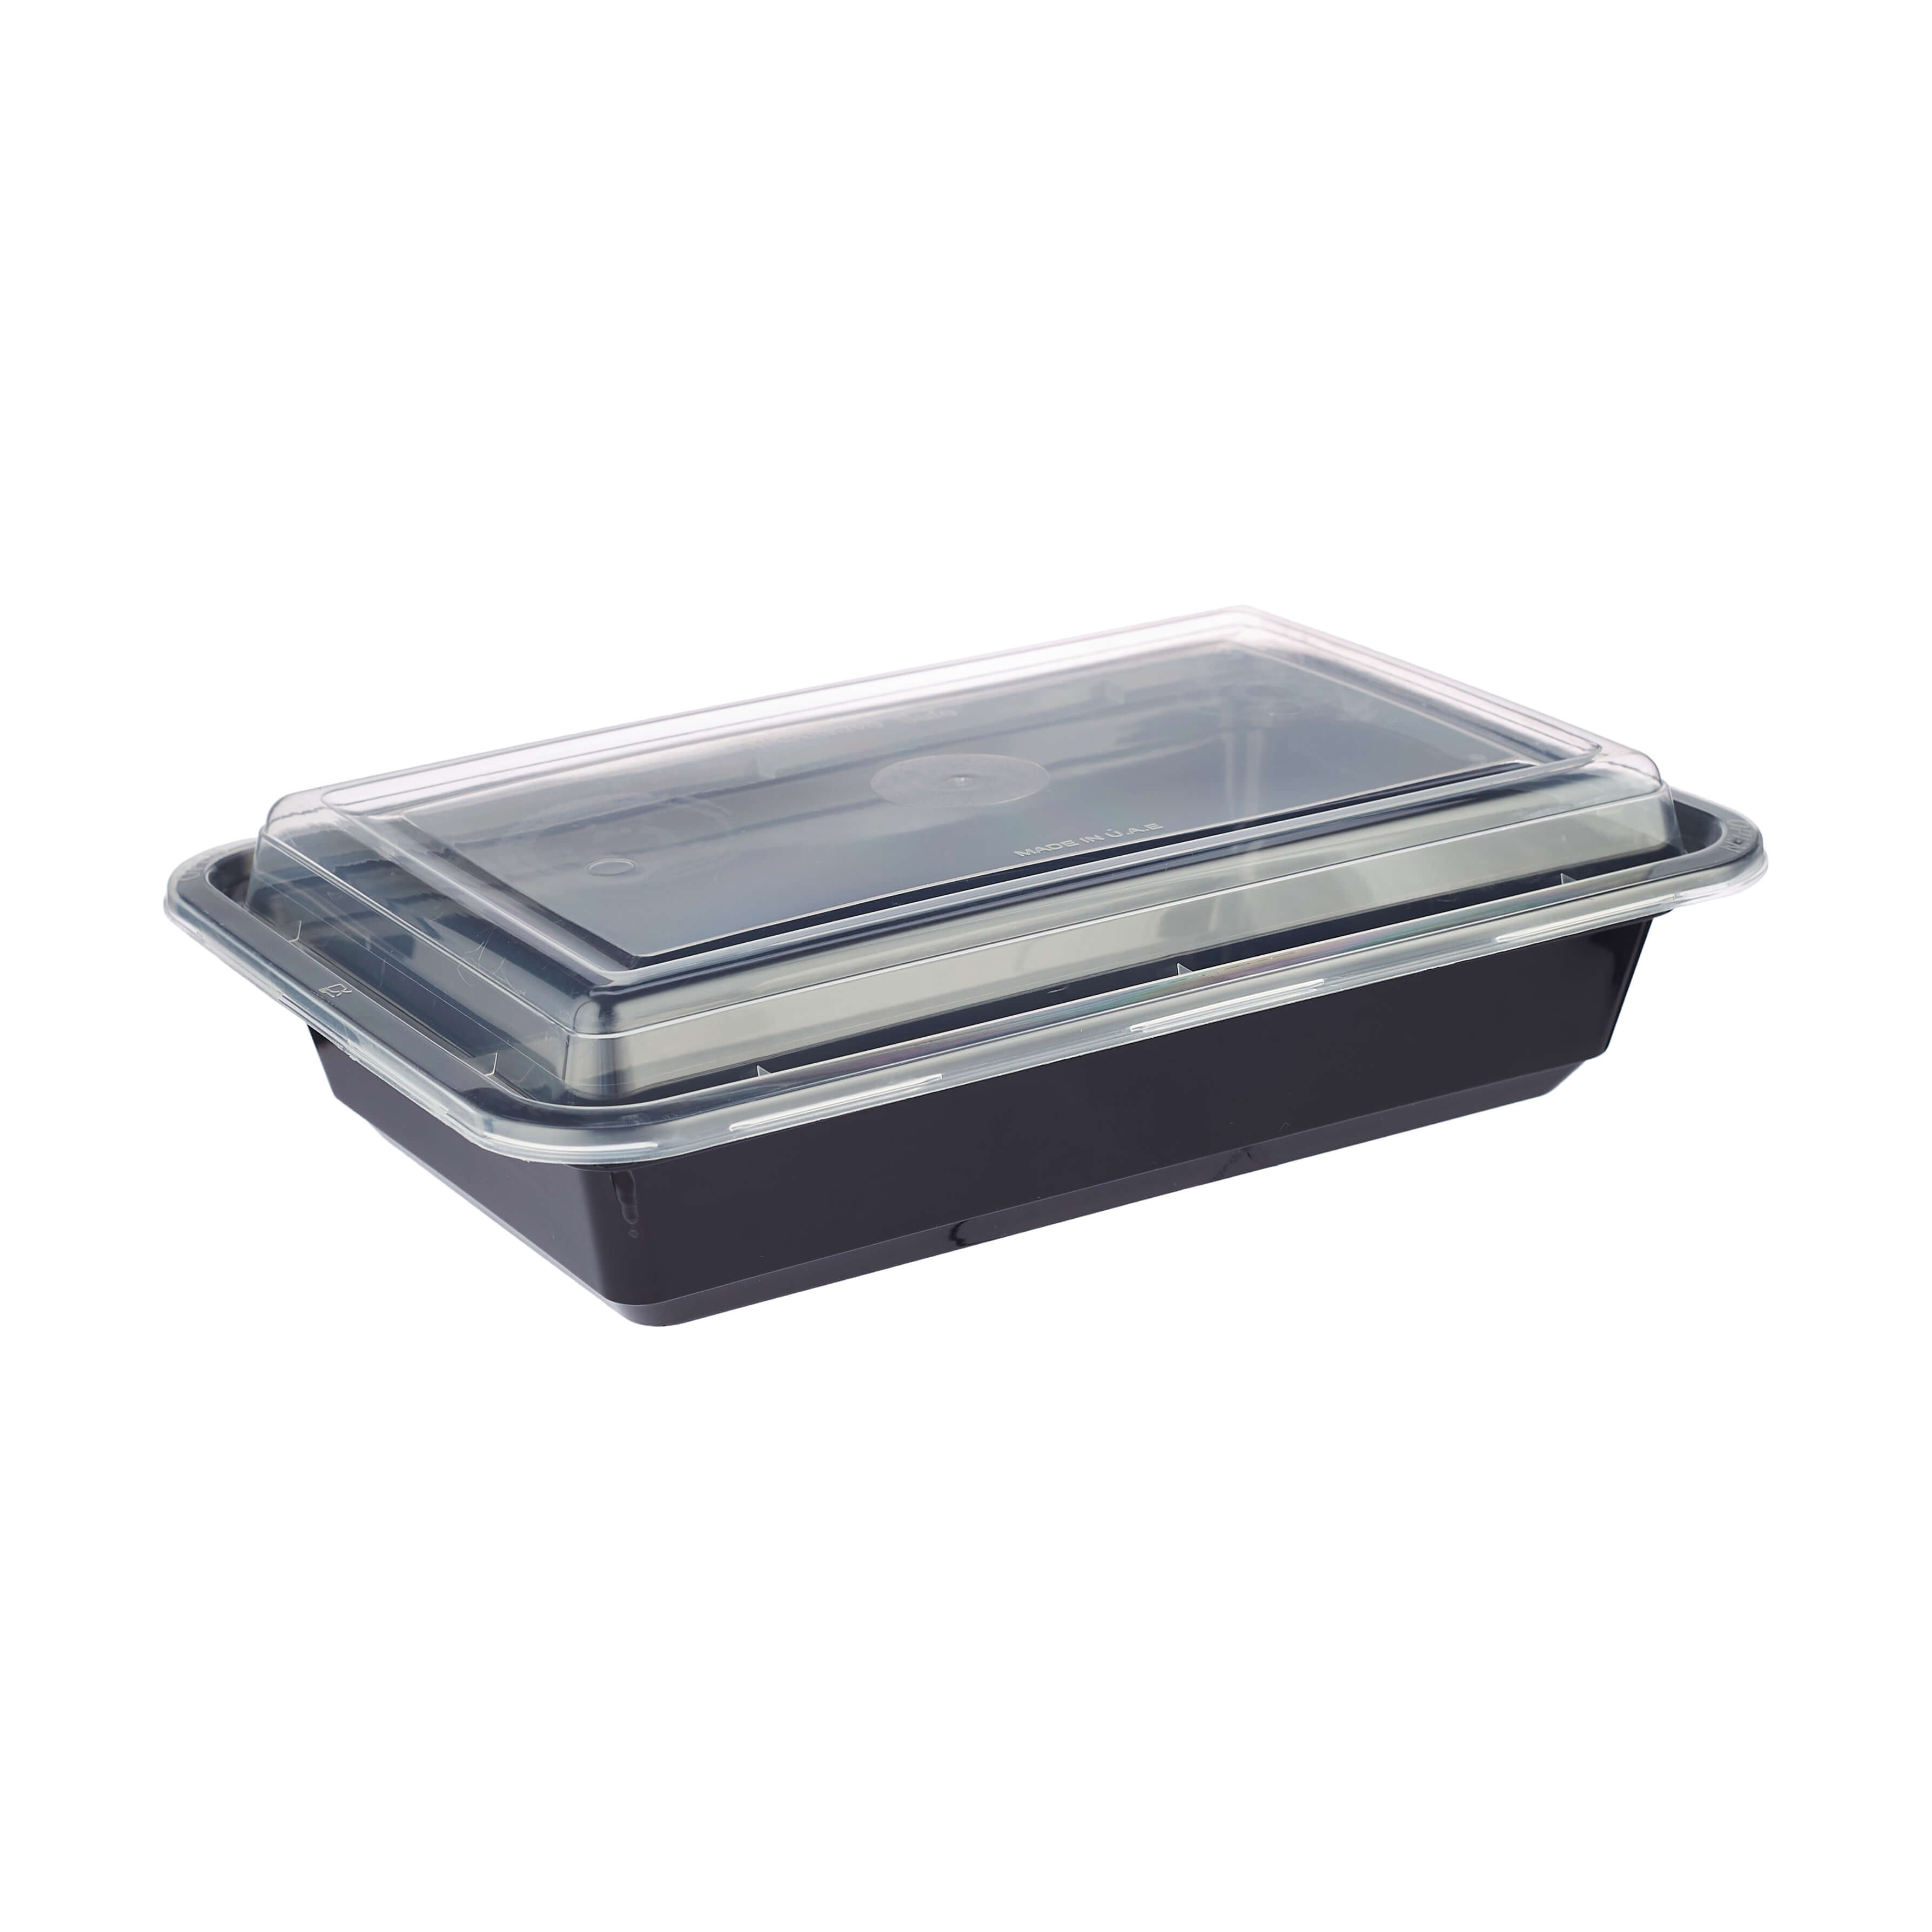 28 Oz Black Base Rectangular Container with Lid - Hotpack Global